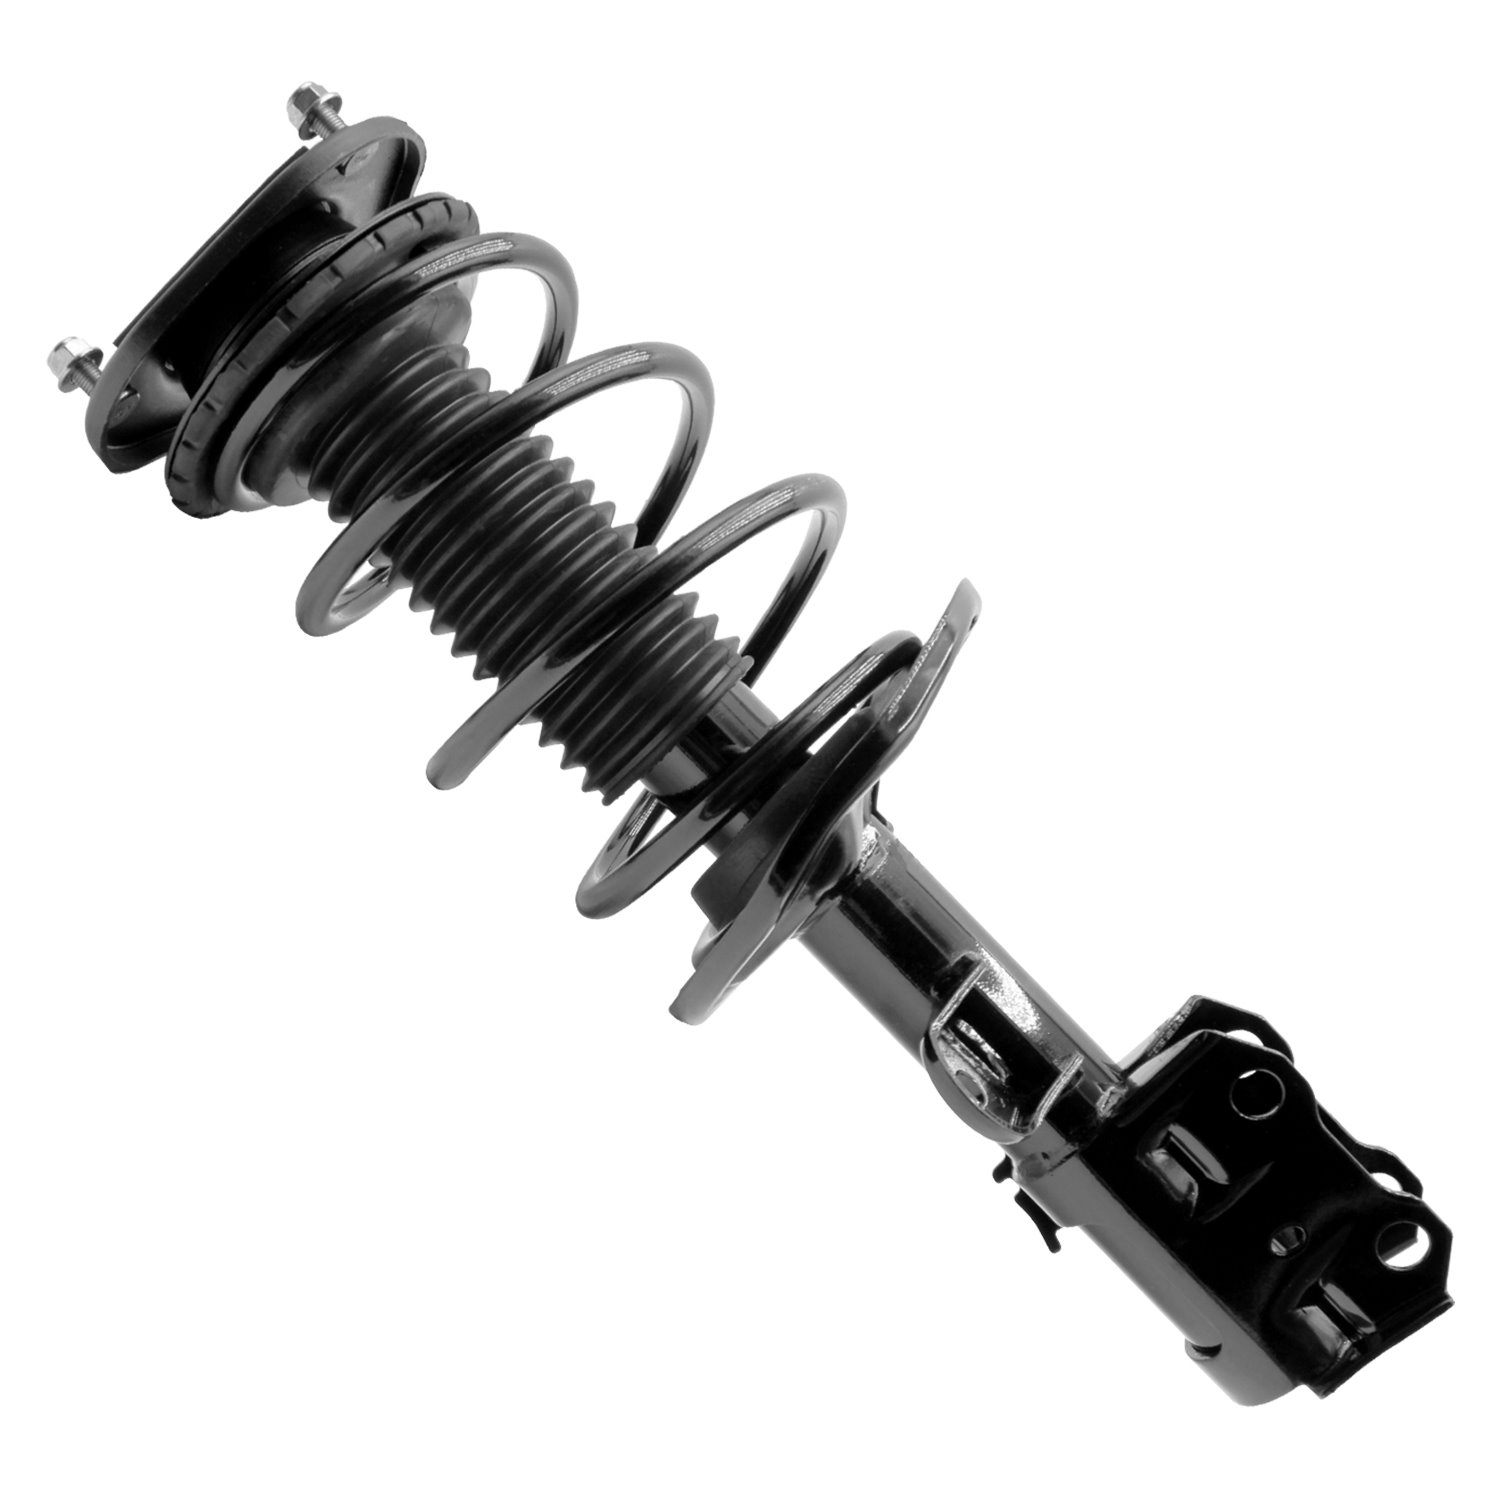 13002 Front Suspension Strut & Coil Spring Assemby Fits Select Lexus CT200h